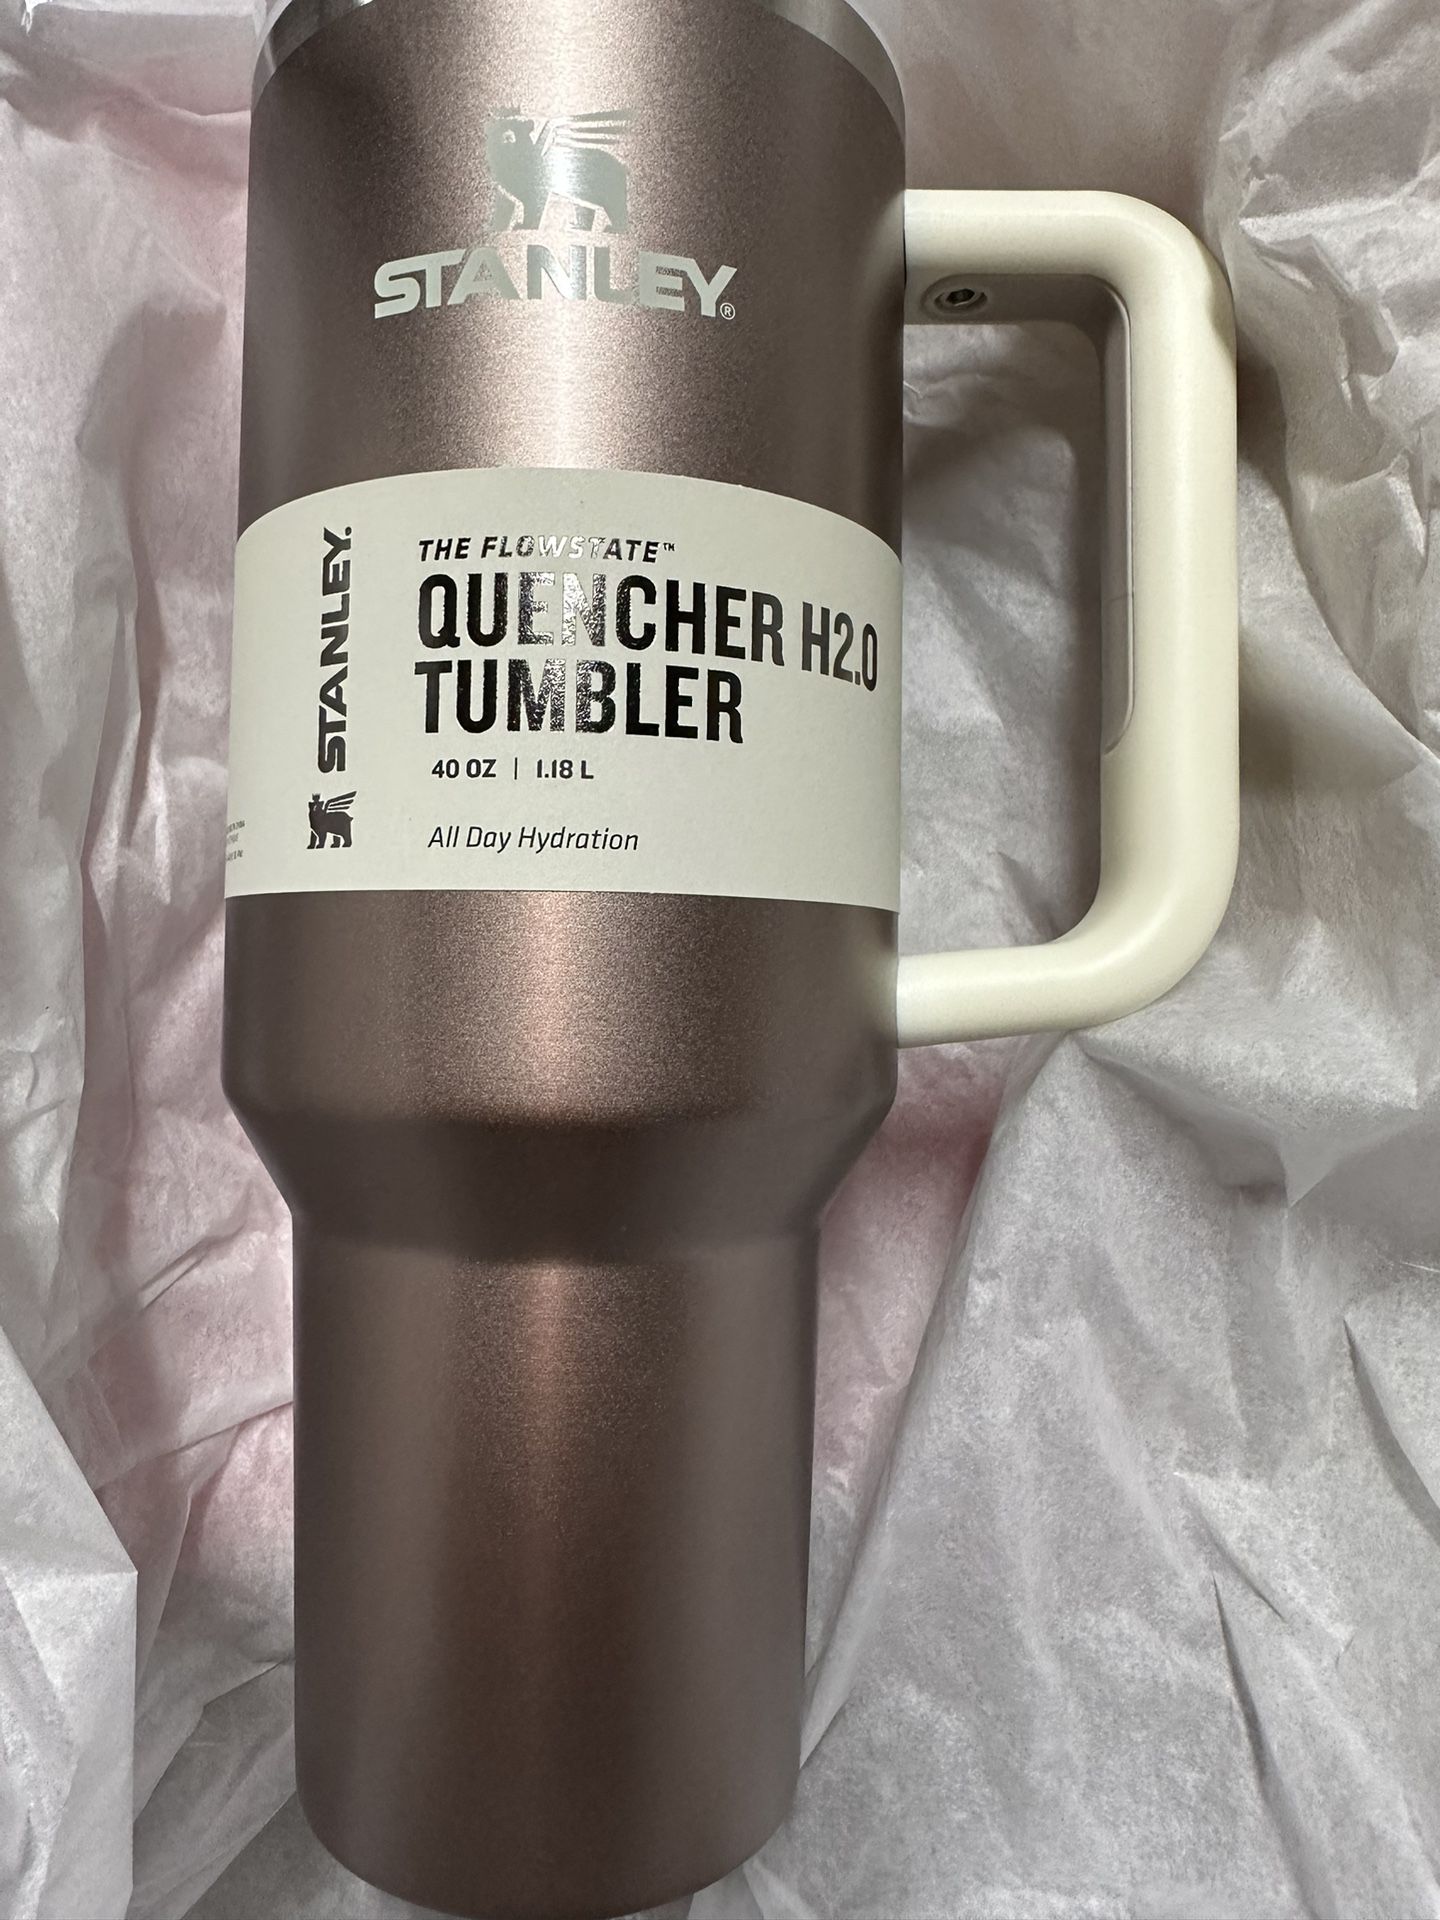 Stanley 40oz Stainless Steel H2.0 Flowstate Quencher Tumbler - Hearth & Hand  with Magnolia for Sale in Salt Lake City, UT - OfferUp